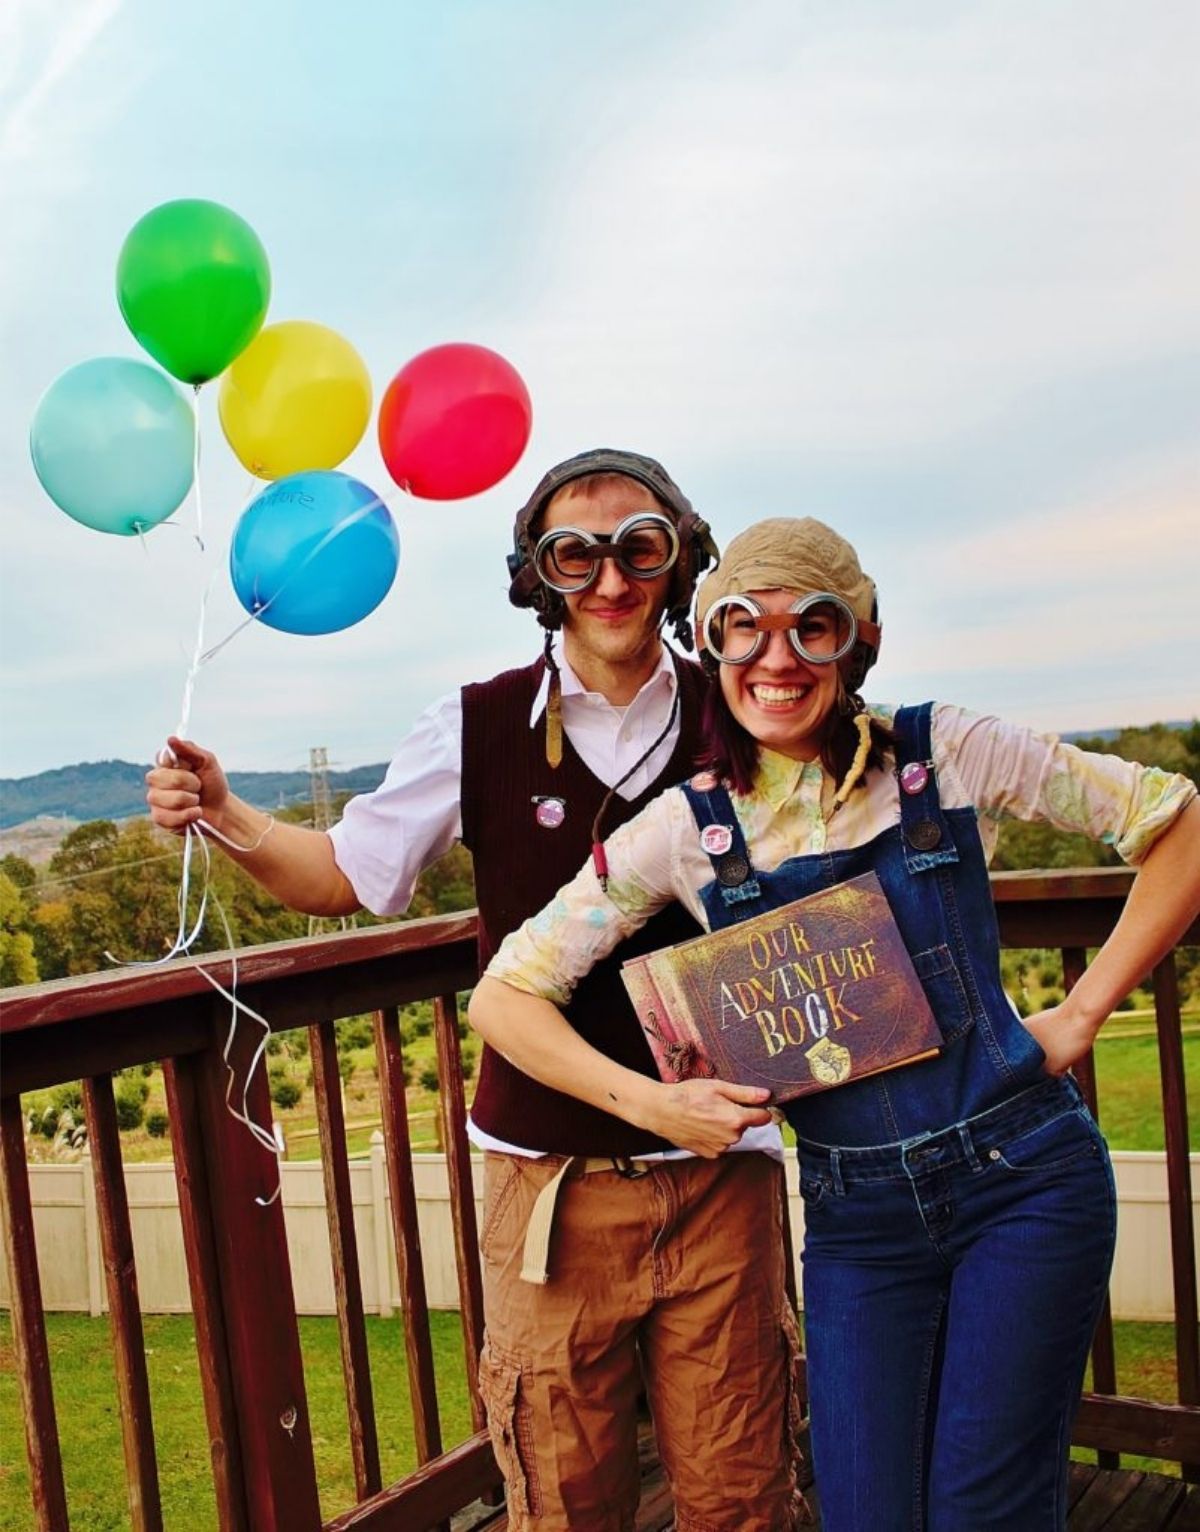 Carl And Ellie From Up couples costumes